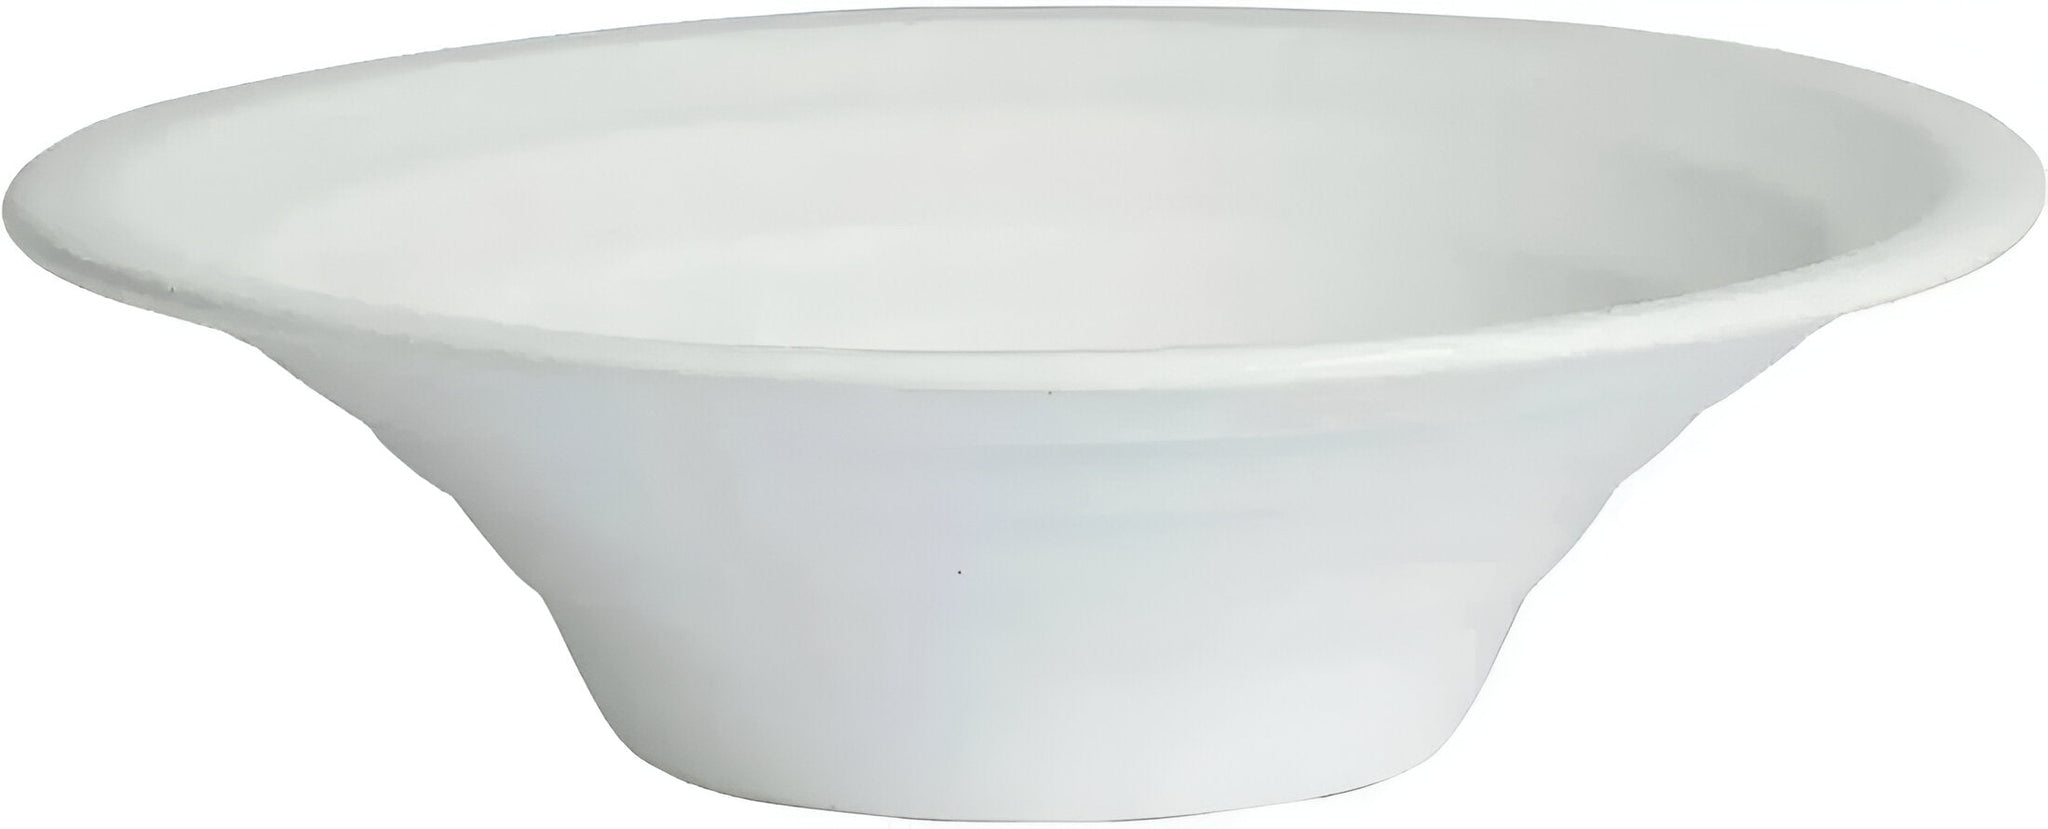 Bugambilia - Classic 272 Oz X-Large Round White Concentric Deep Bowl With Elegantly Textured - FRD15WW